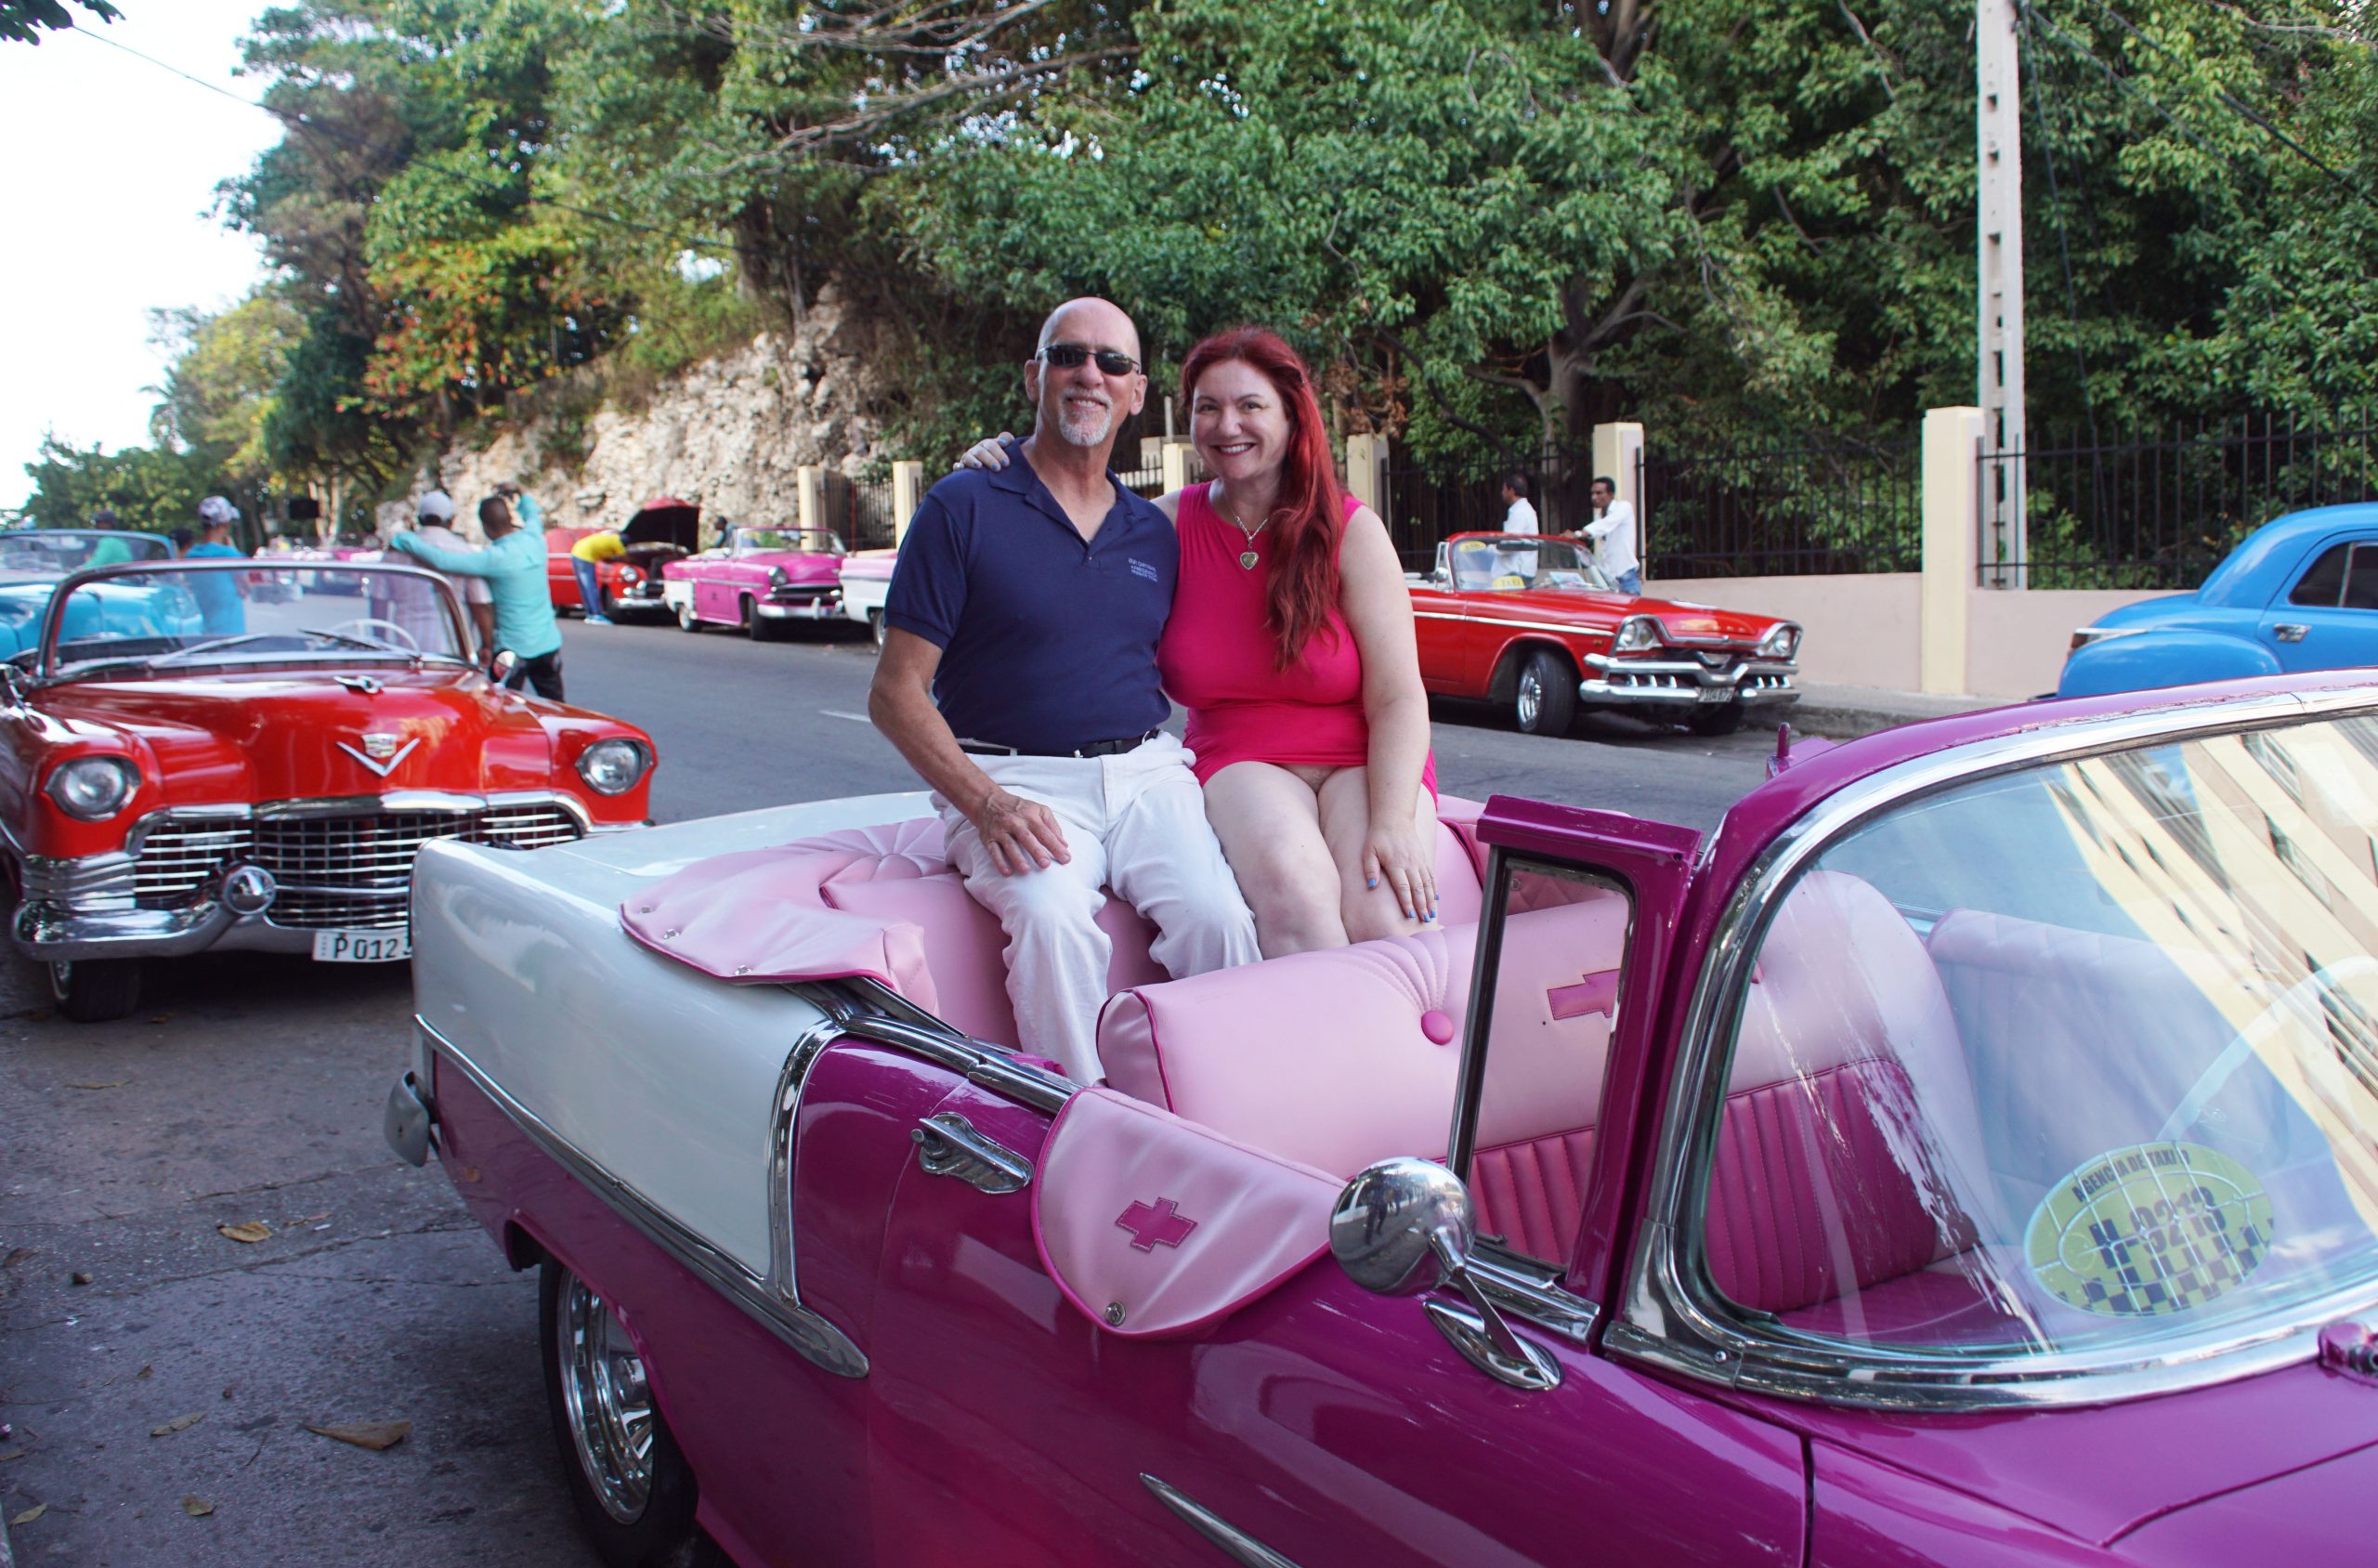 Ready to ride in our pink classic 1955 Chevy convertible!